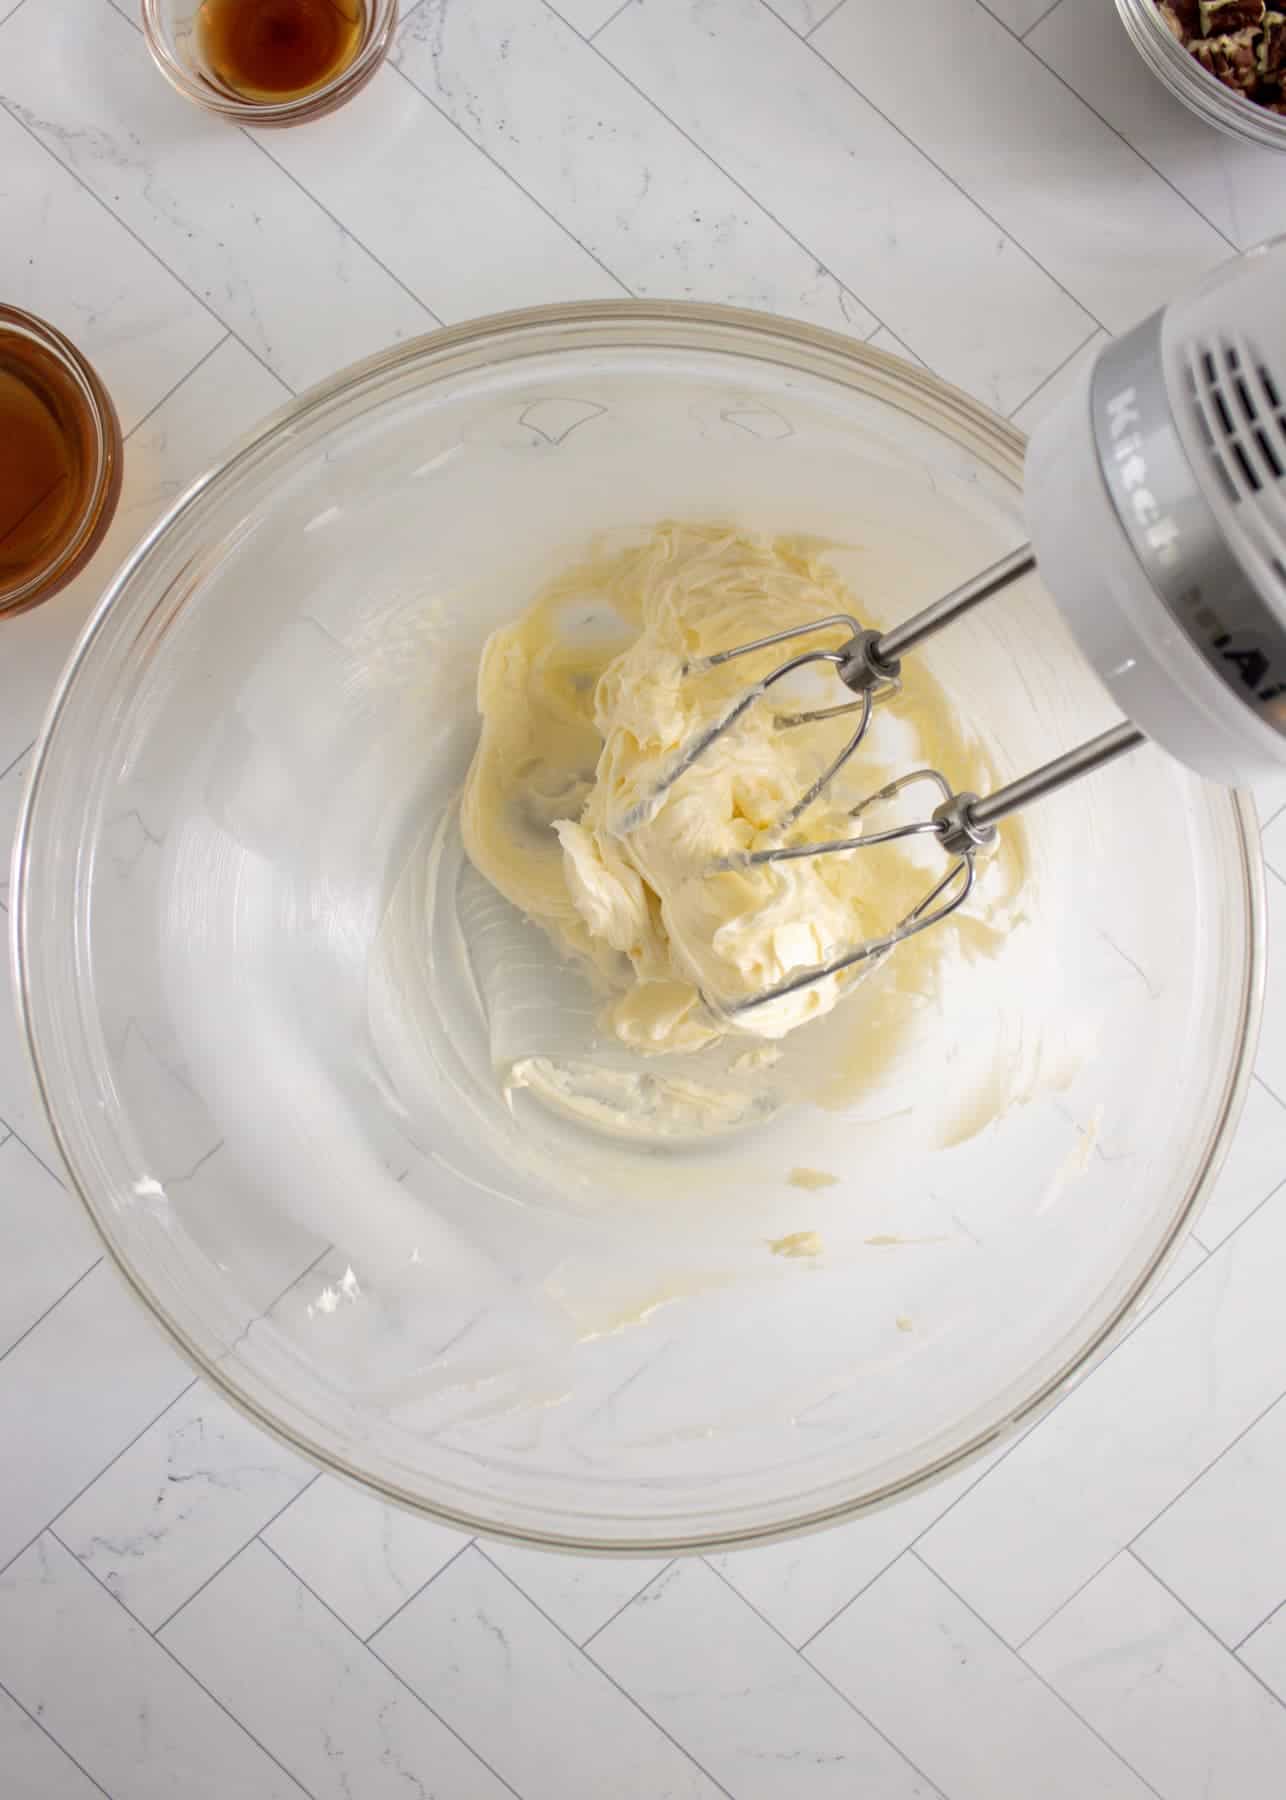 Creaming butter in a glass bowl with a KitchenAid mixer.